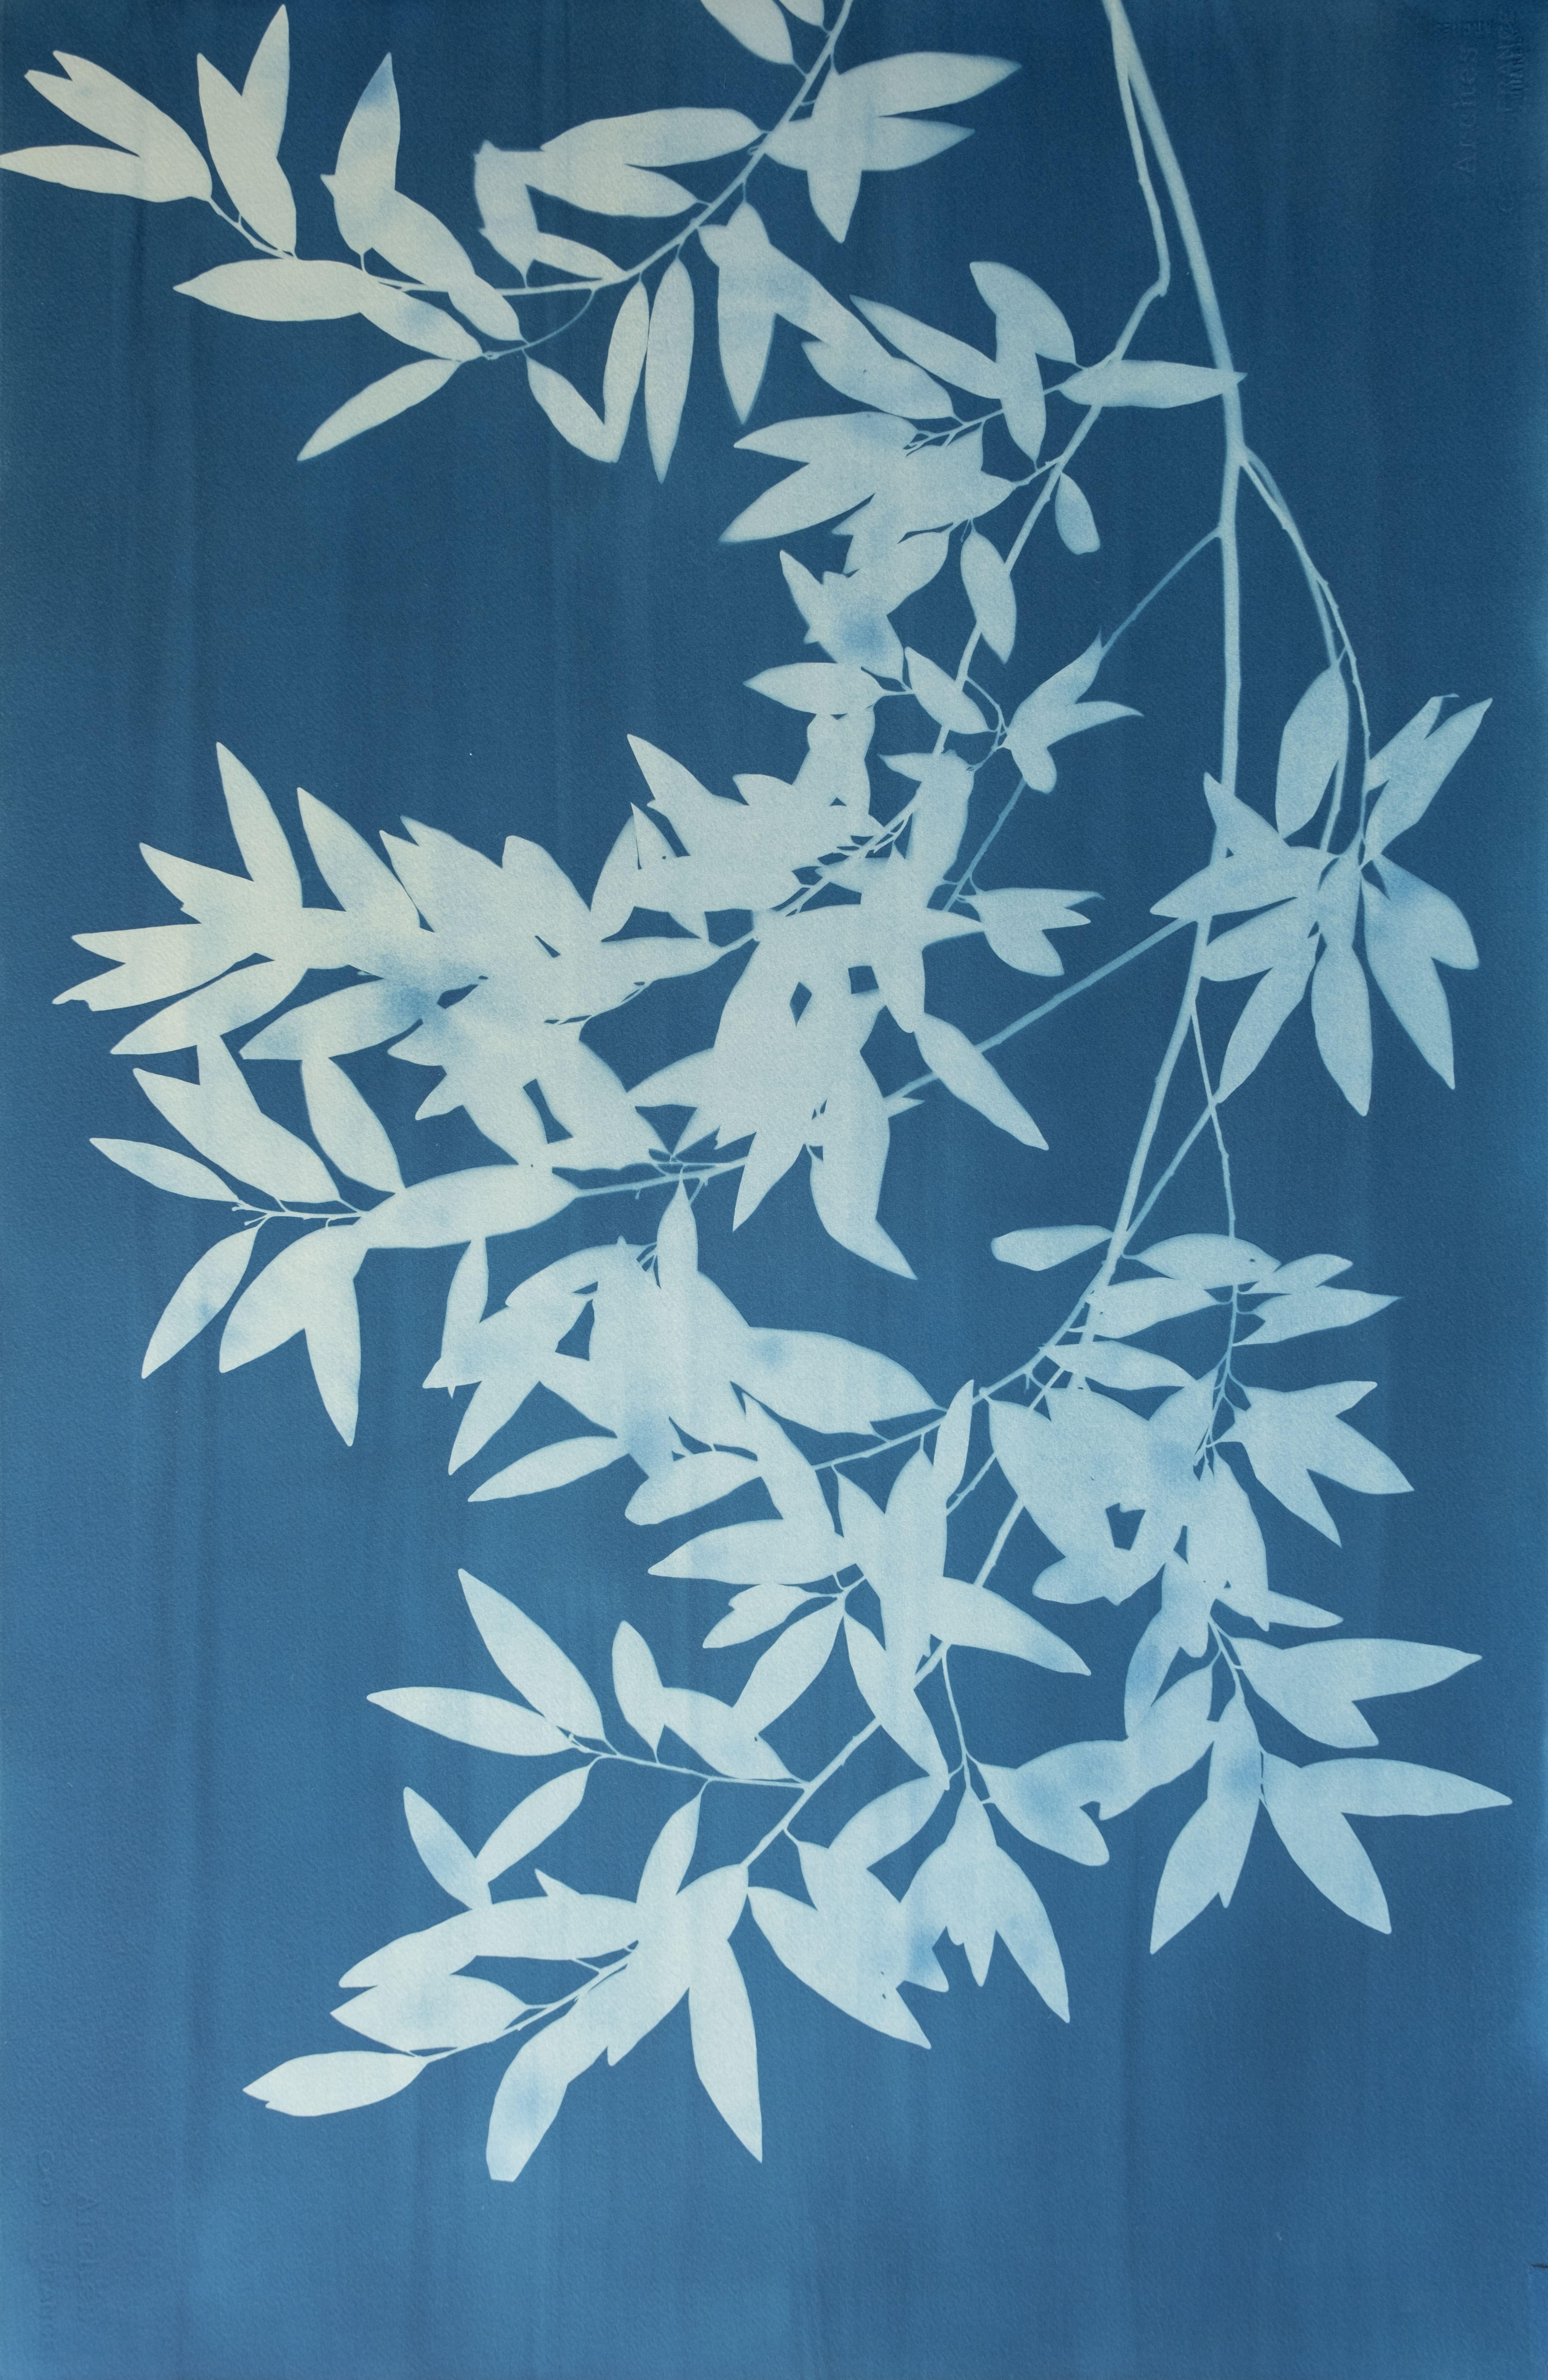 These are two separate 40 x 26 inch cyanotypes (unique monotypes) made using the same tree branches flipped over facing the opposite direction, the result being a symmetrical mirror image.

The pale blue leaves of the right panel are a bit paler